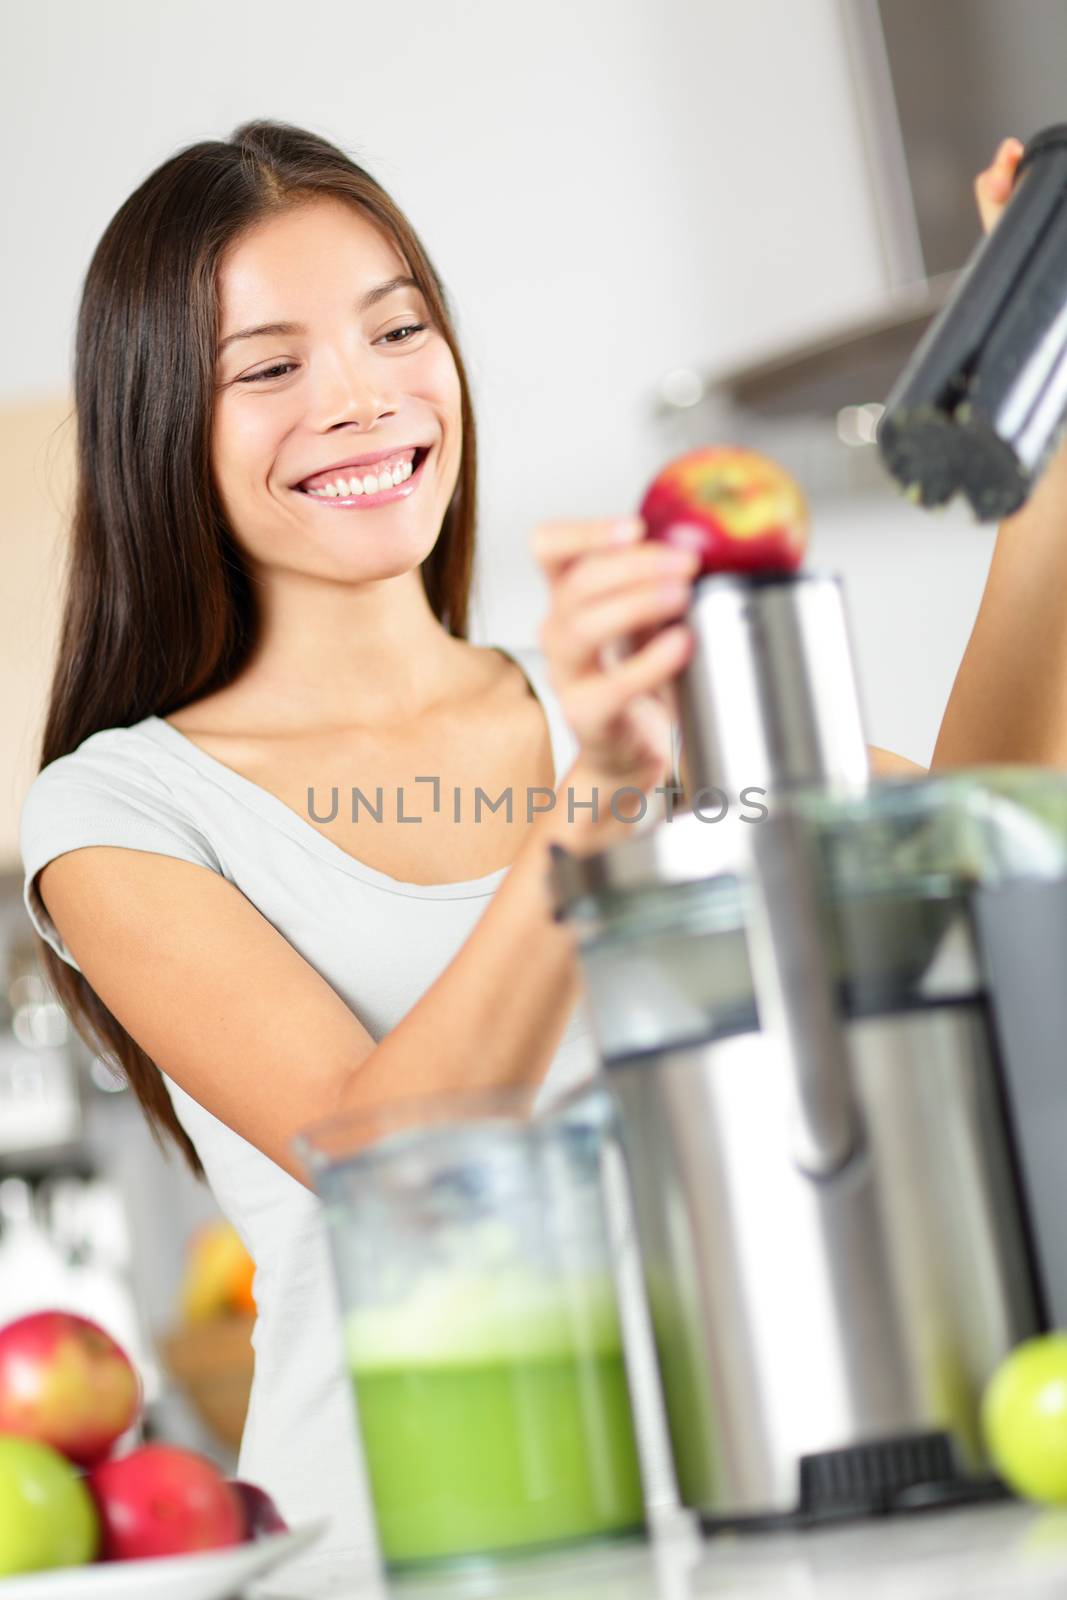 Woman making apple and vegetable juice on juicer machine at home in kitchen. Juicing and healthy eating happy woman making green vegetable and fruit juice. Mixed race Asian Caucasian model.